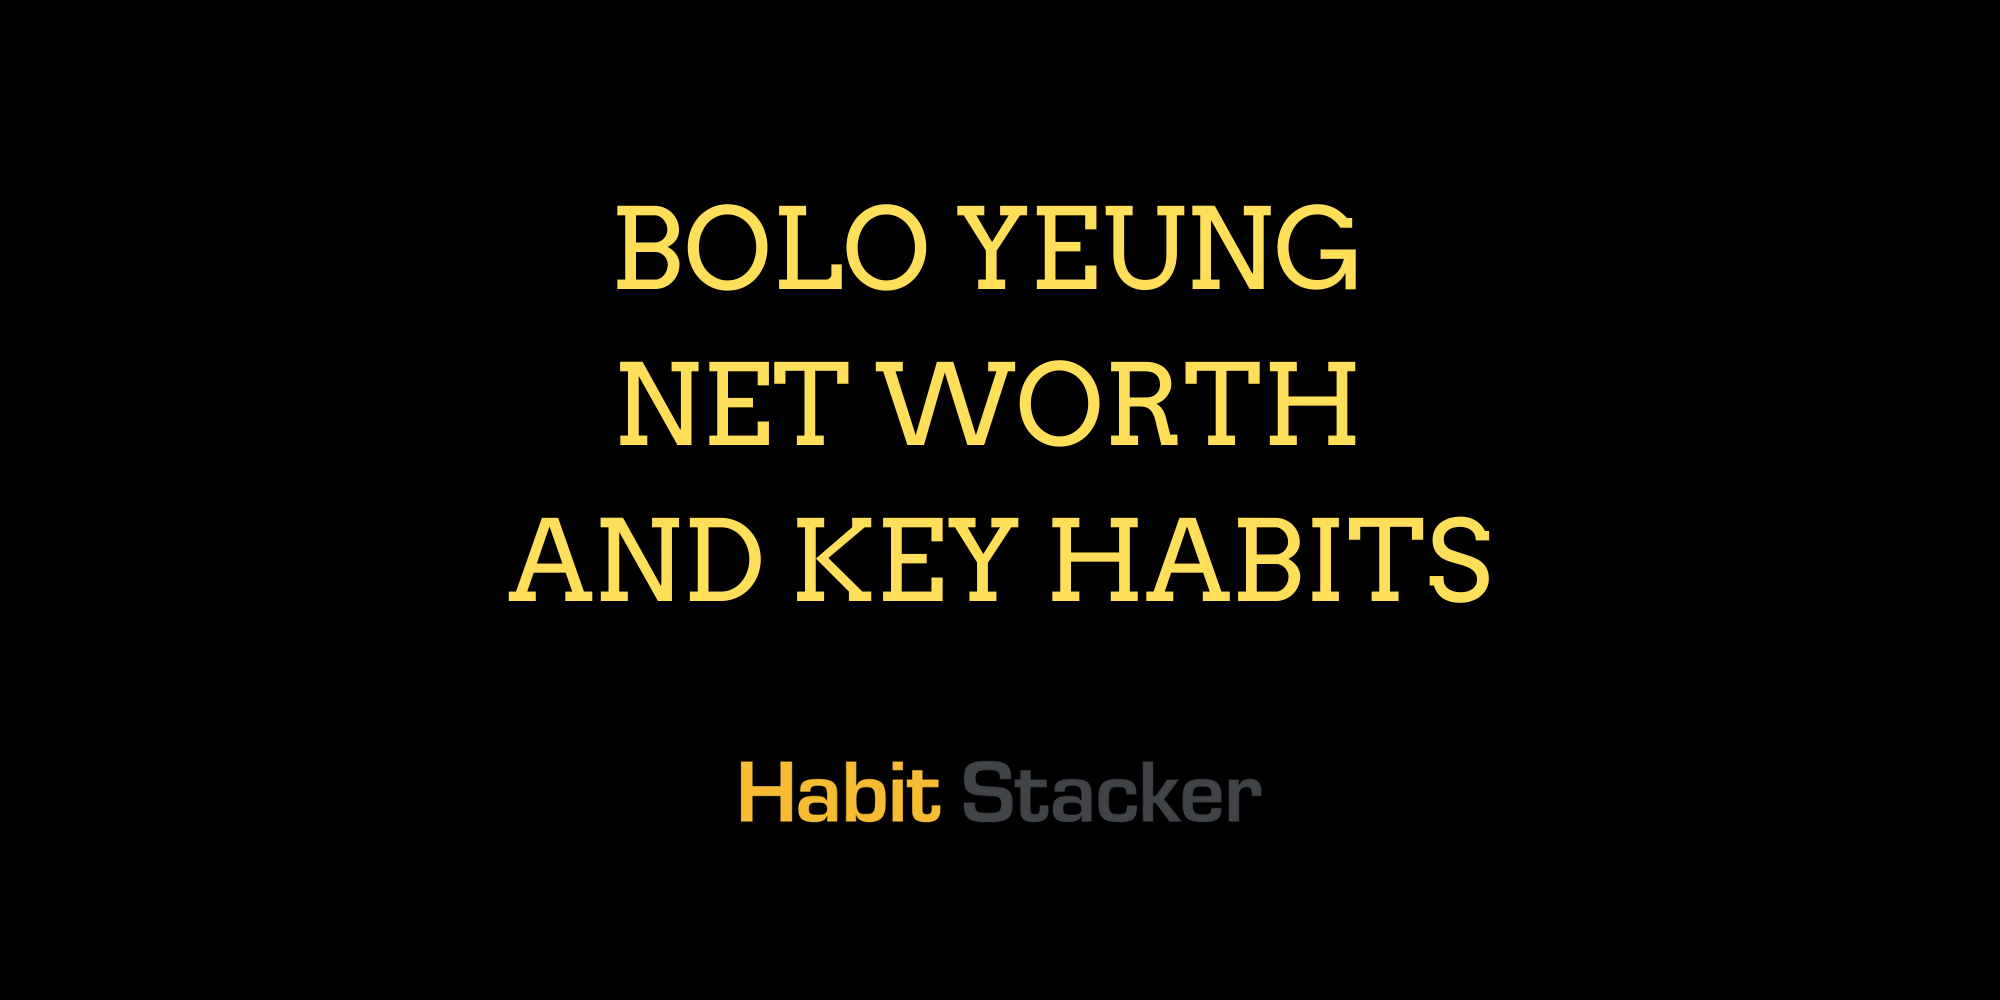 Bolo Yeung Net Worth and Key Habits